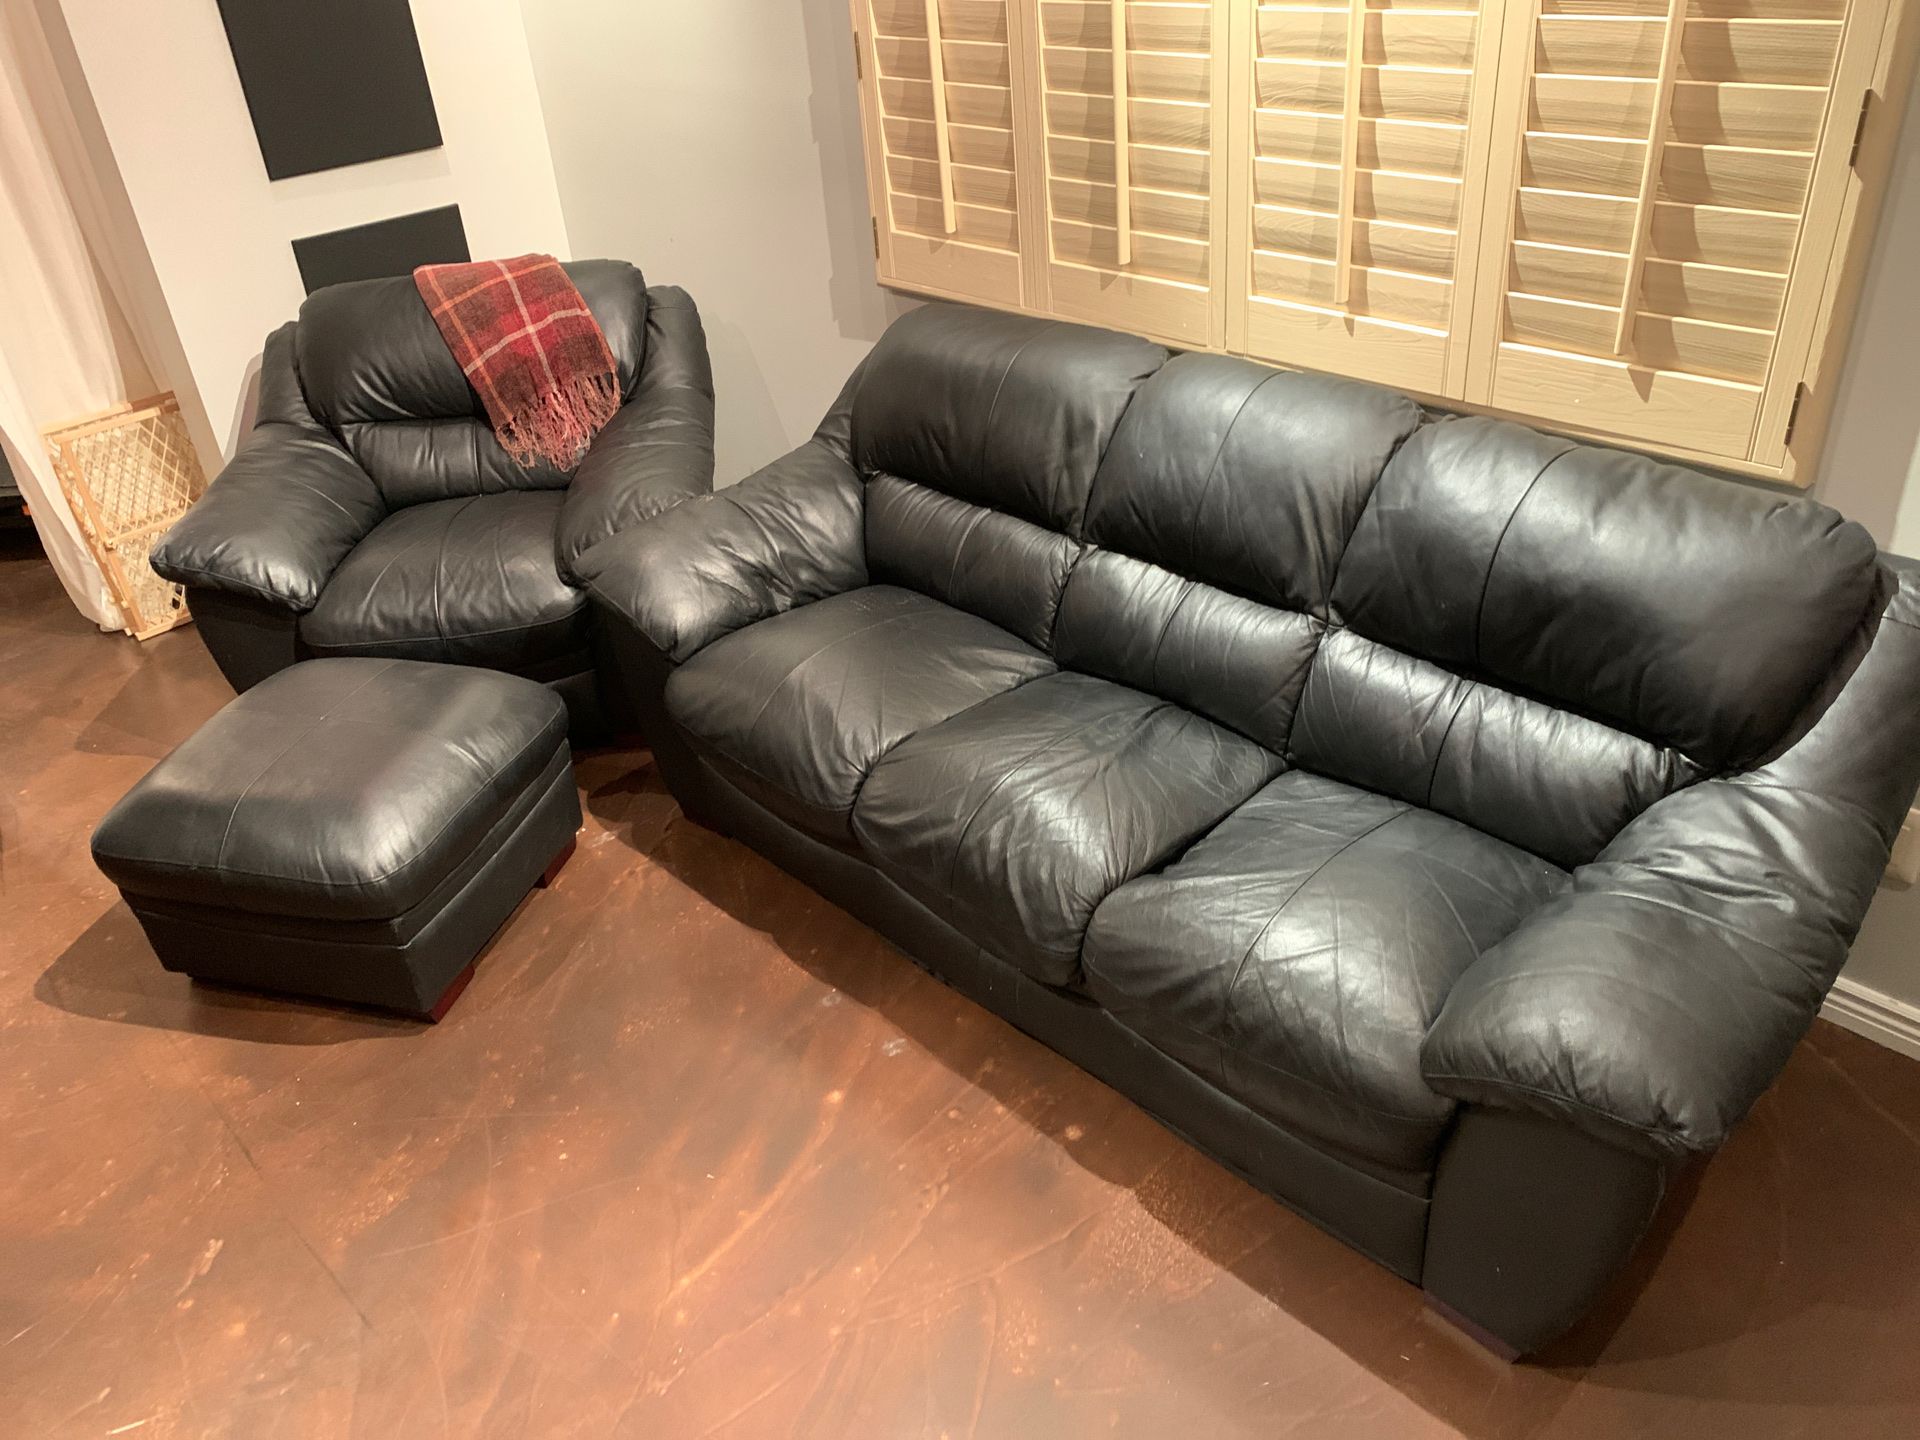 CHEAP GREAT CONDITION!! Leather Couch, Armchair, & Footrest Set! CAN DELIVER